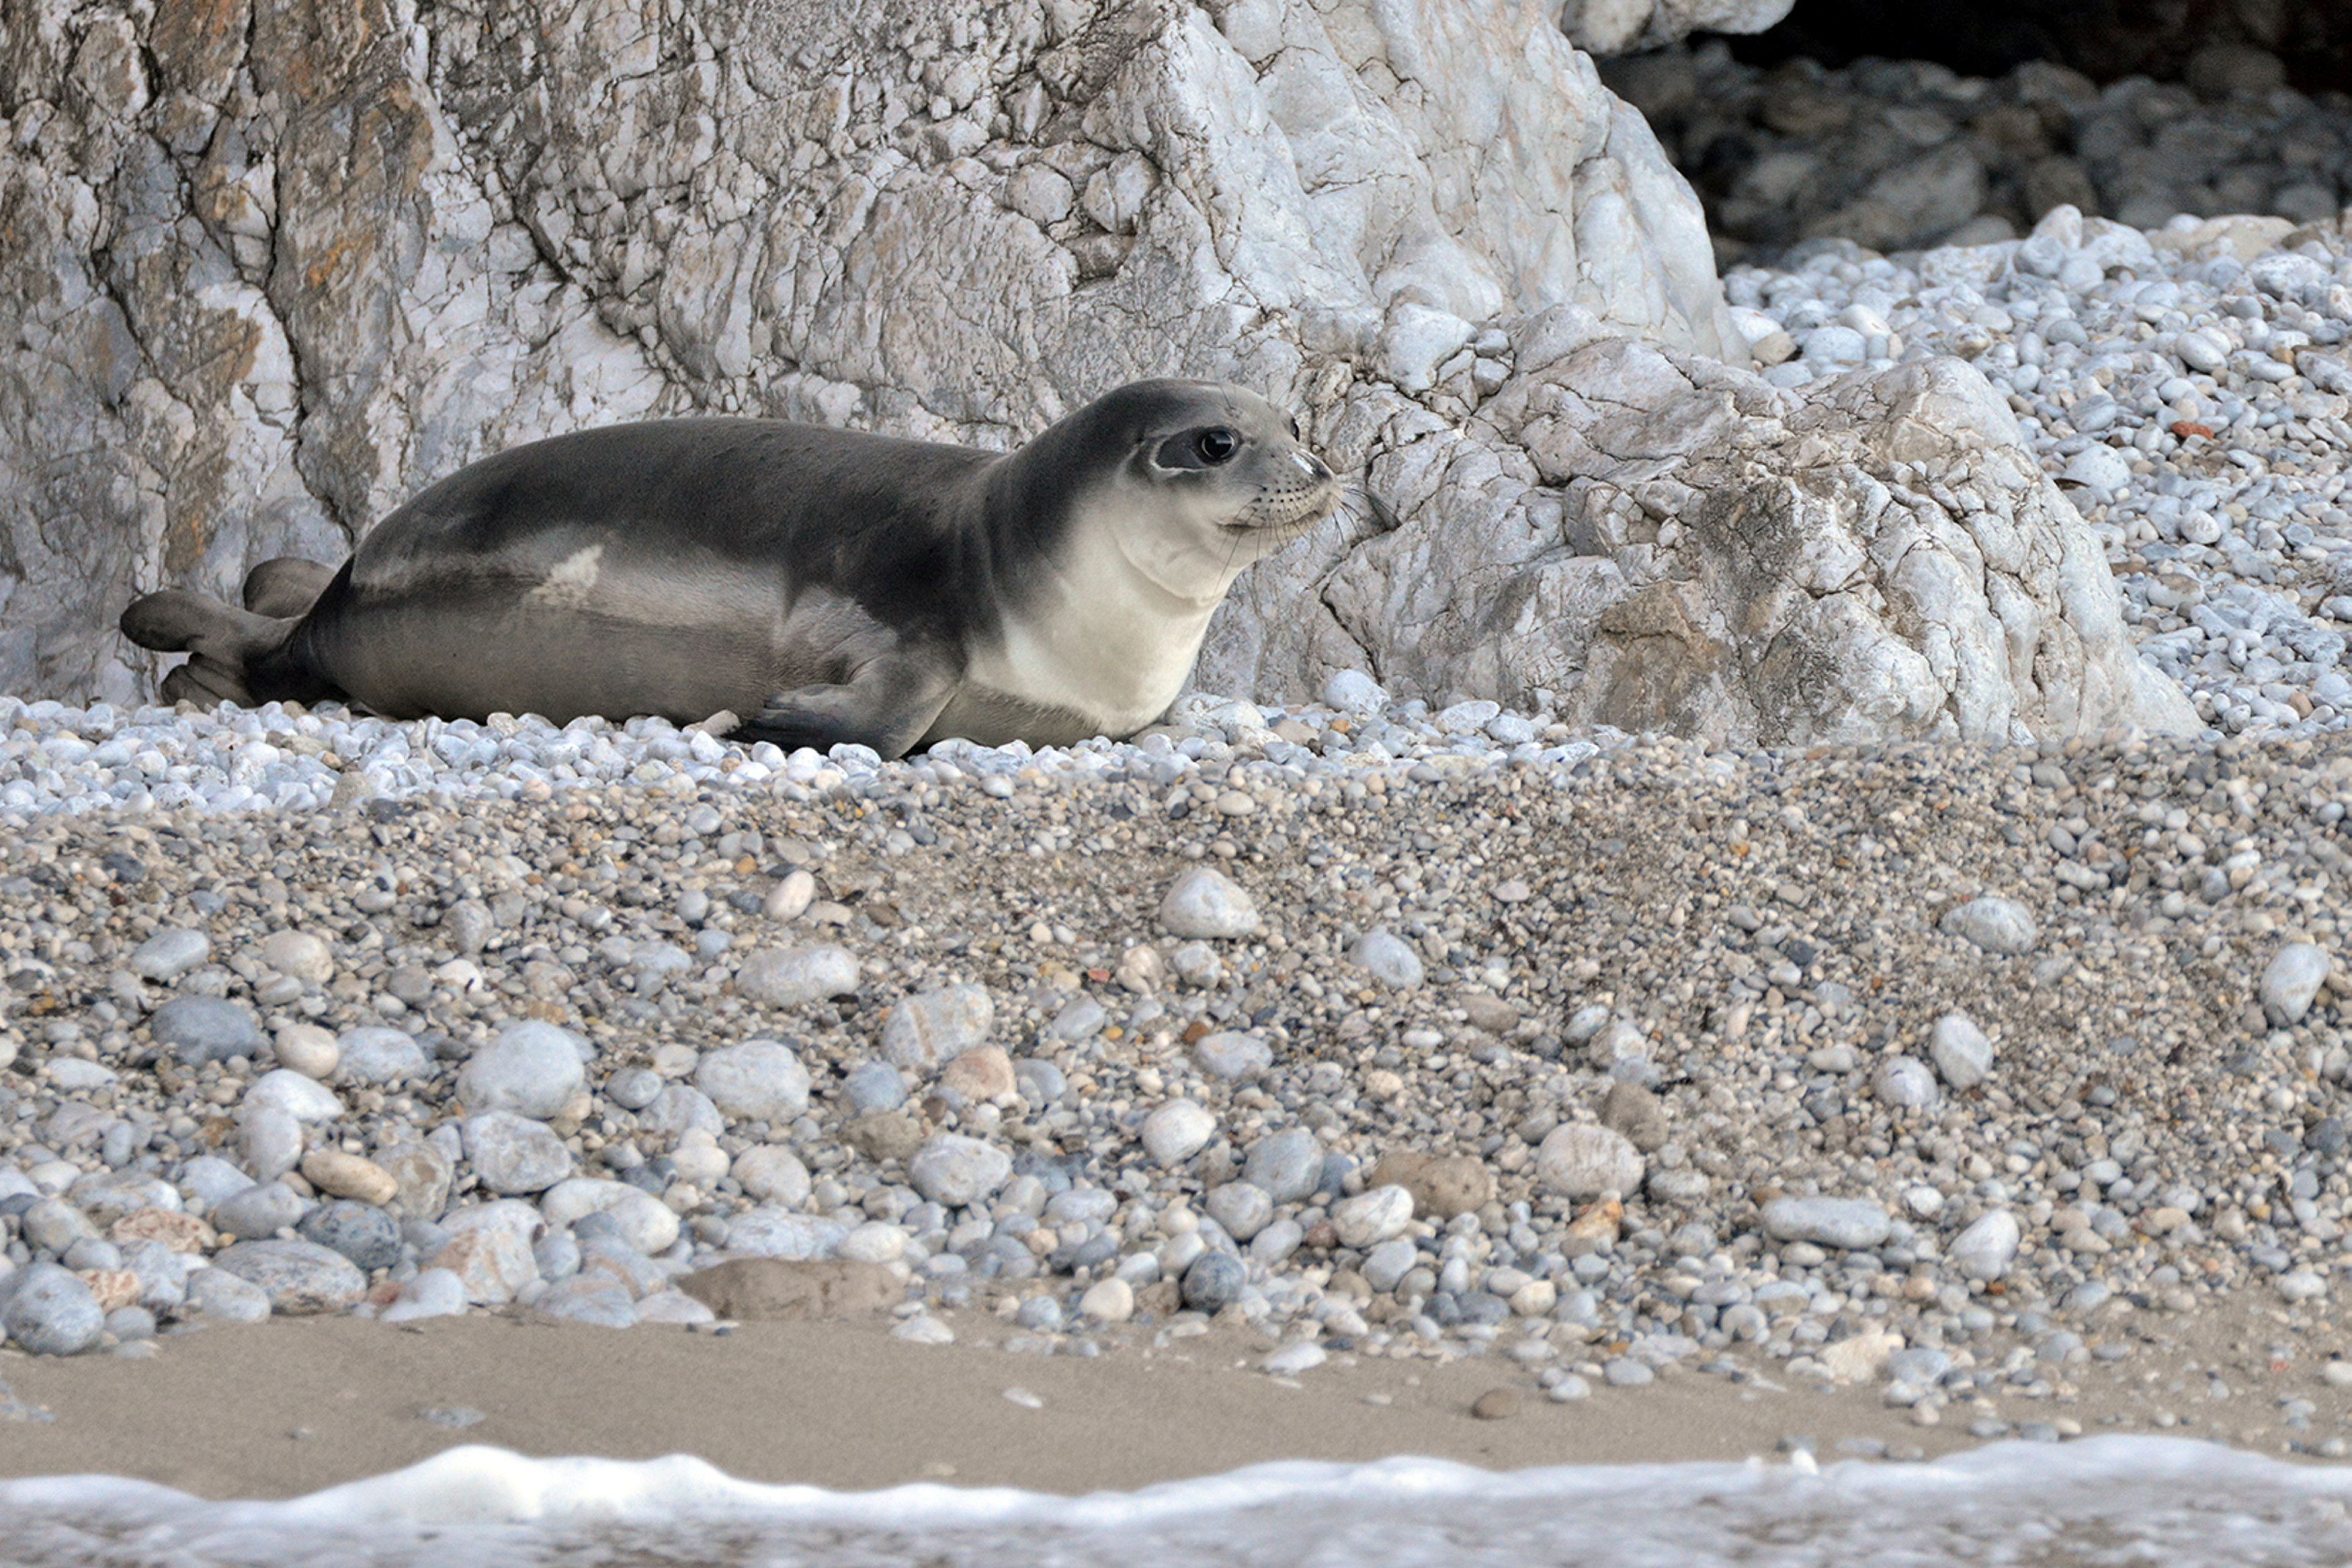 Outrage in Greece at killing of Kostis, a rare Monk seal rescued by fishermen